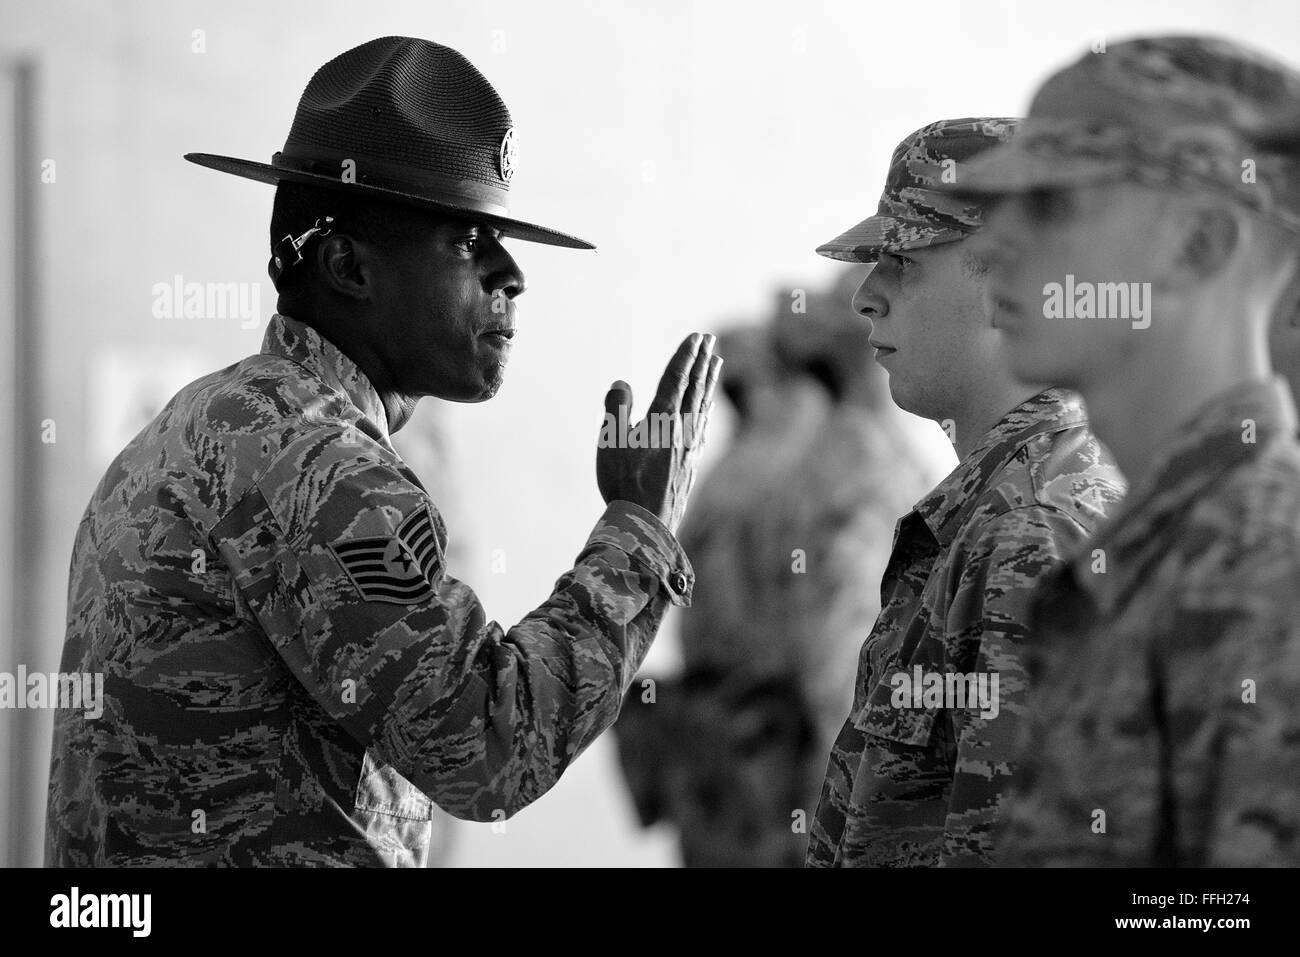 323rd Training Squadron, military training instructor, Tech. Sgt. Chananyah Stuart, uses a 'knife hand' while correcting a trainee during the first week of basic military training at Joint Base San Antonio-Lackland, Texas. Stock Photo